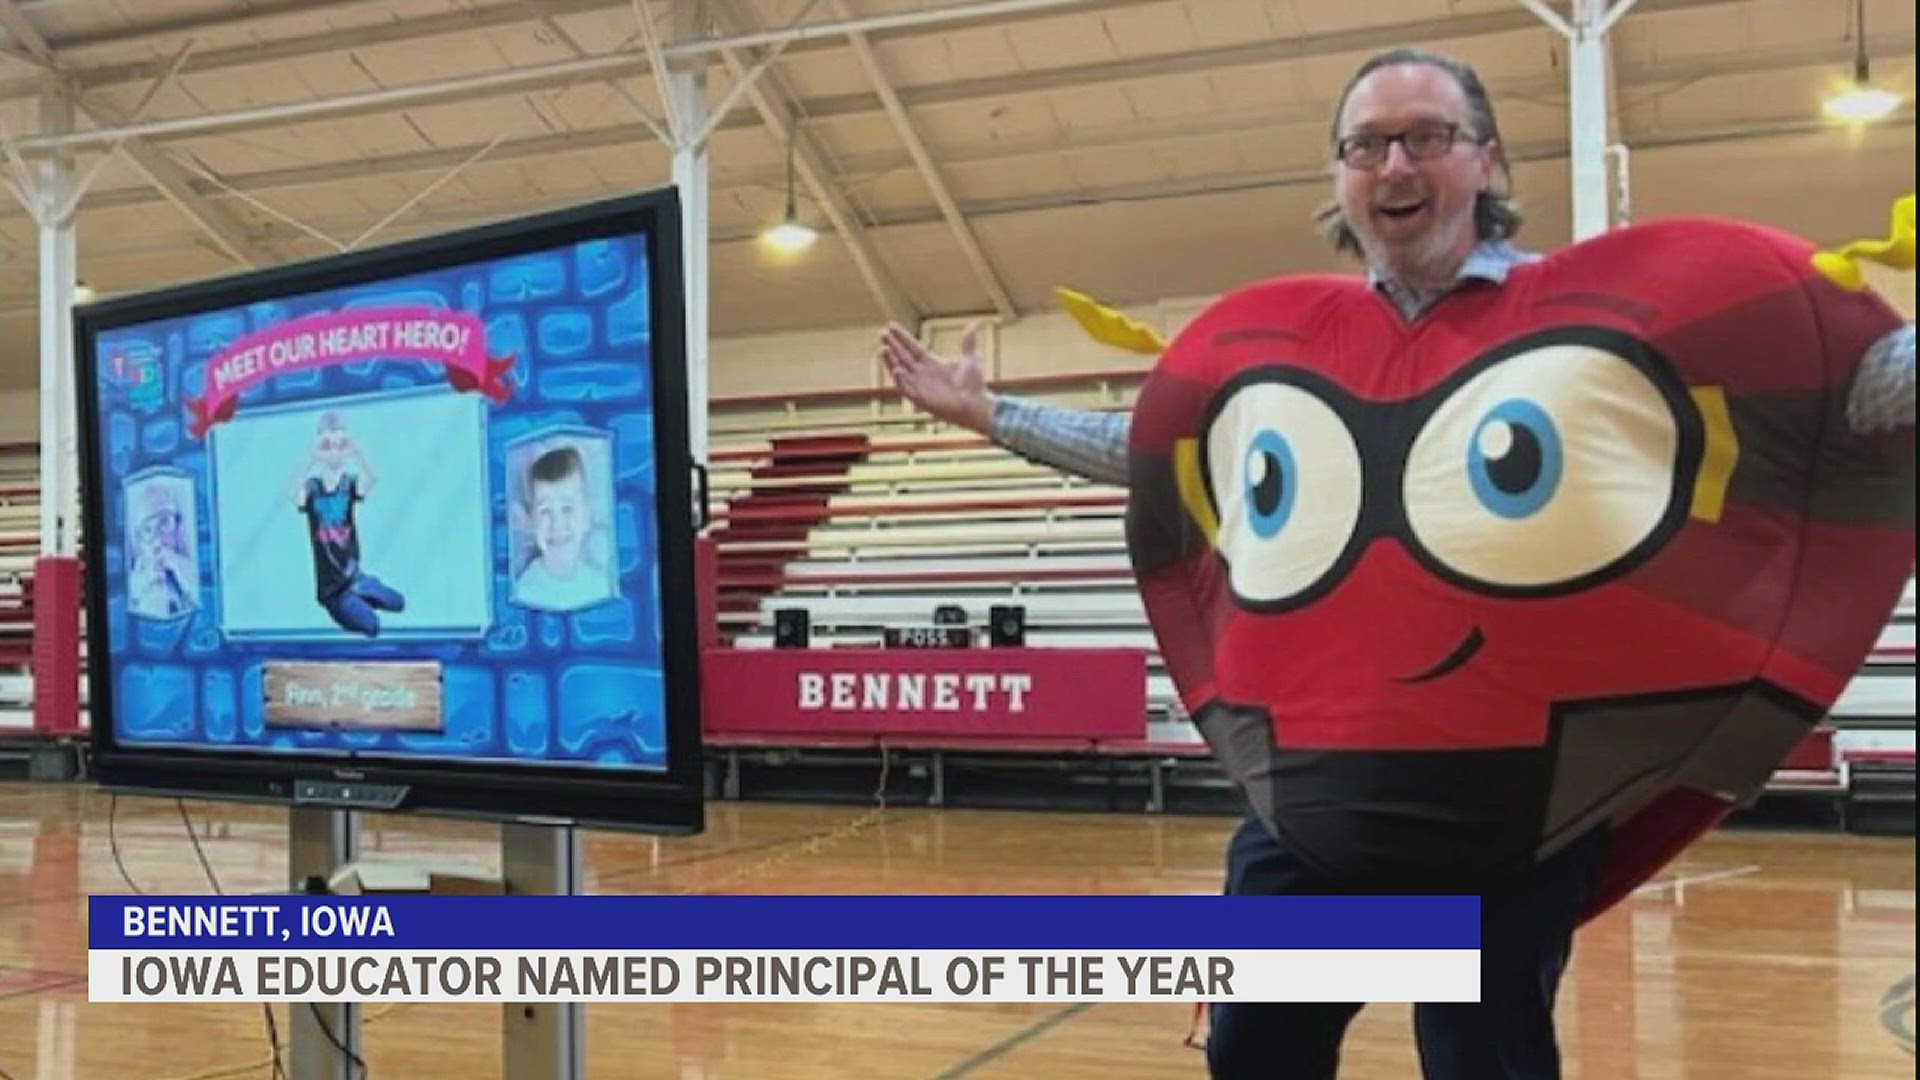 Jeremiah Costello is a principal in Bennett, Iowa, and received the distinction for inspiring his students to double their AHA fundraising goal.